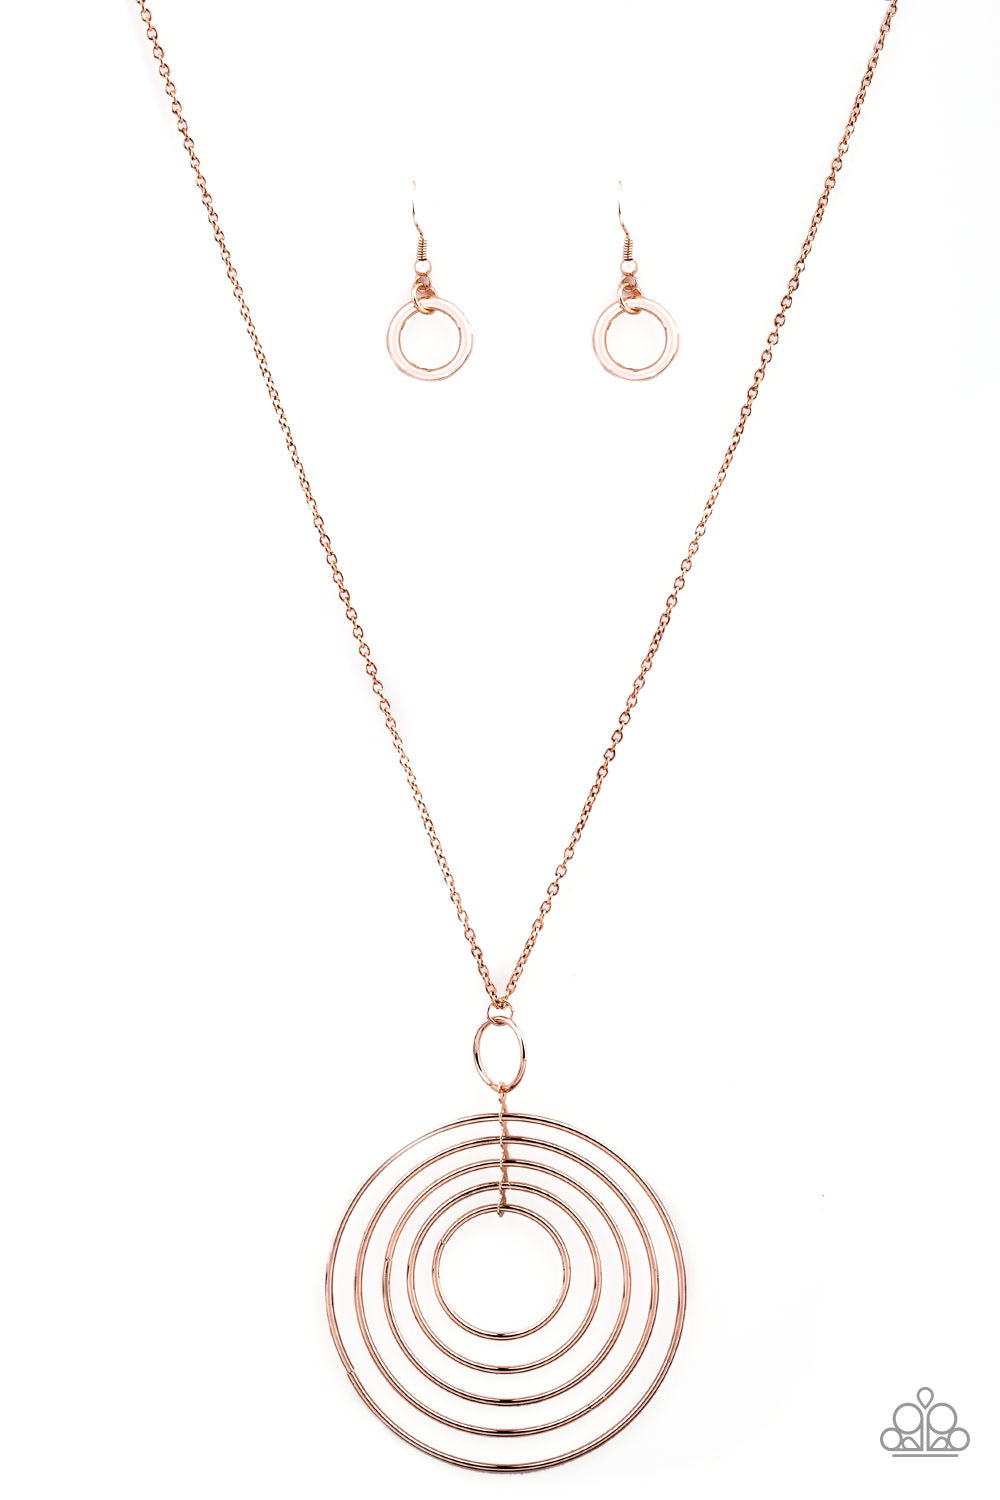 Paparazzi Necklaces Running Circles In My Mind - Rose Gold